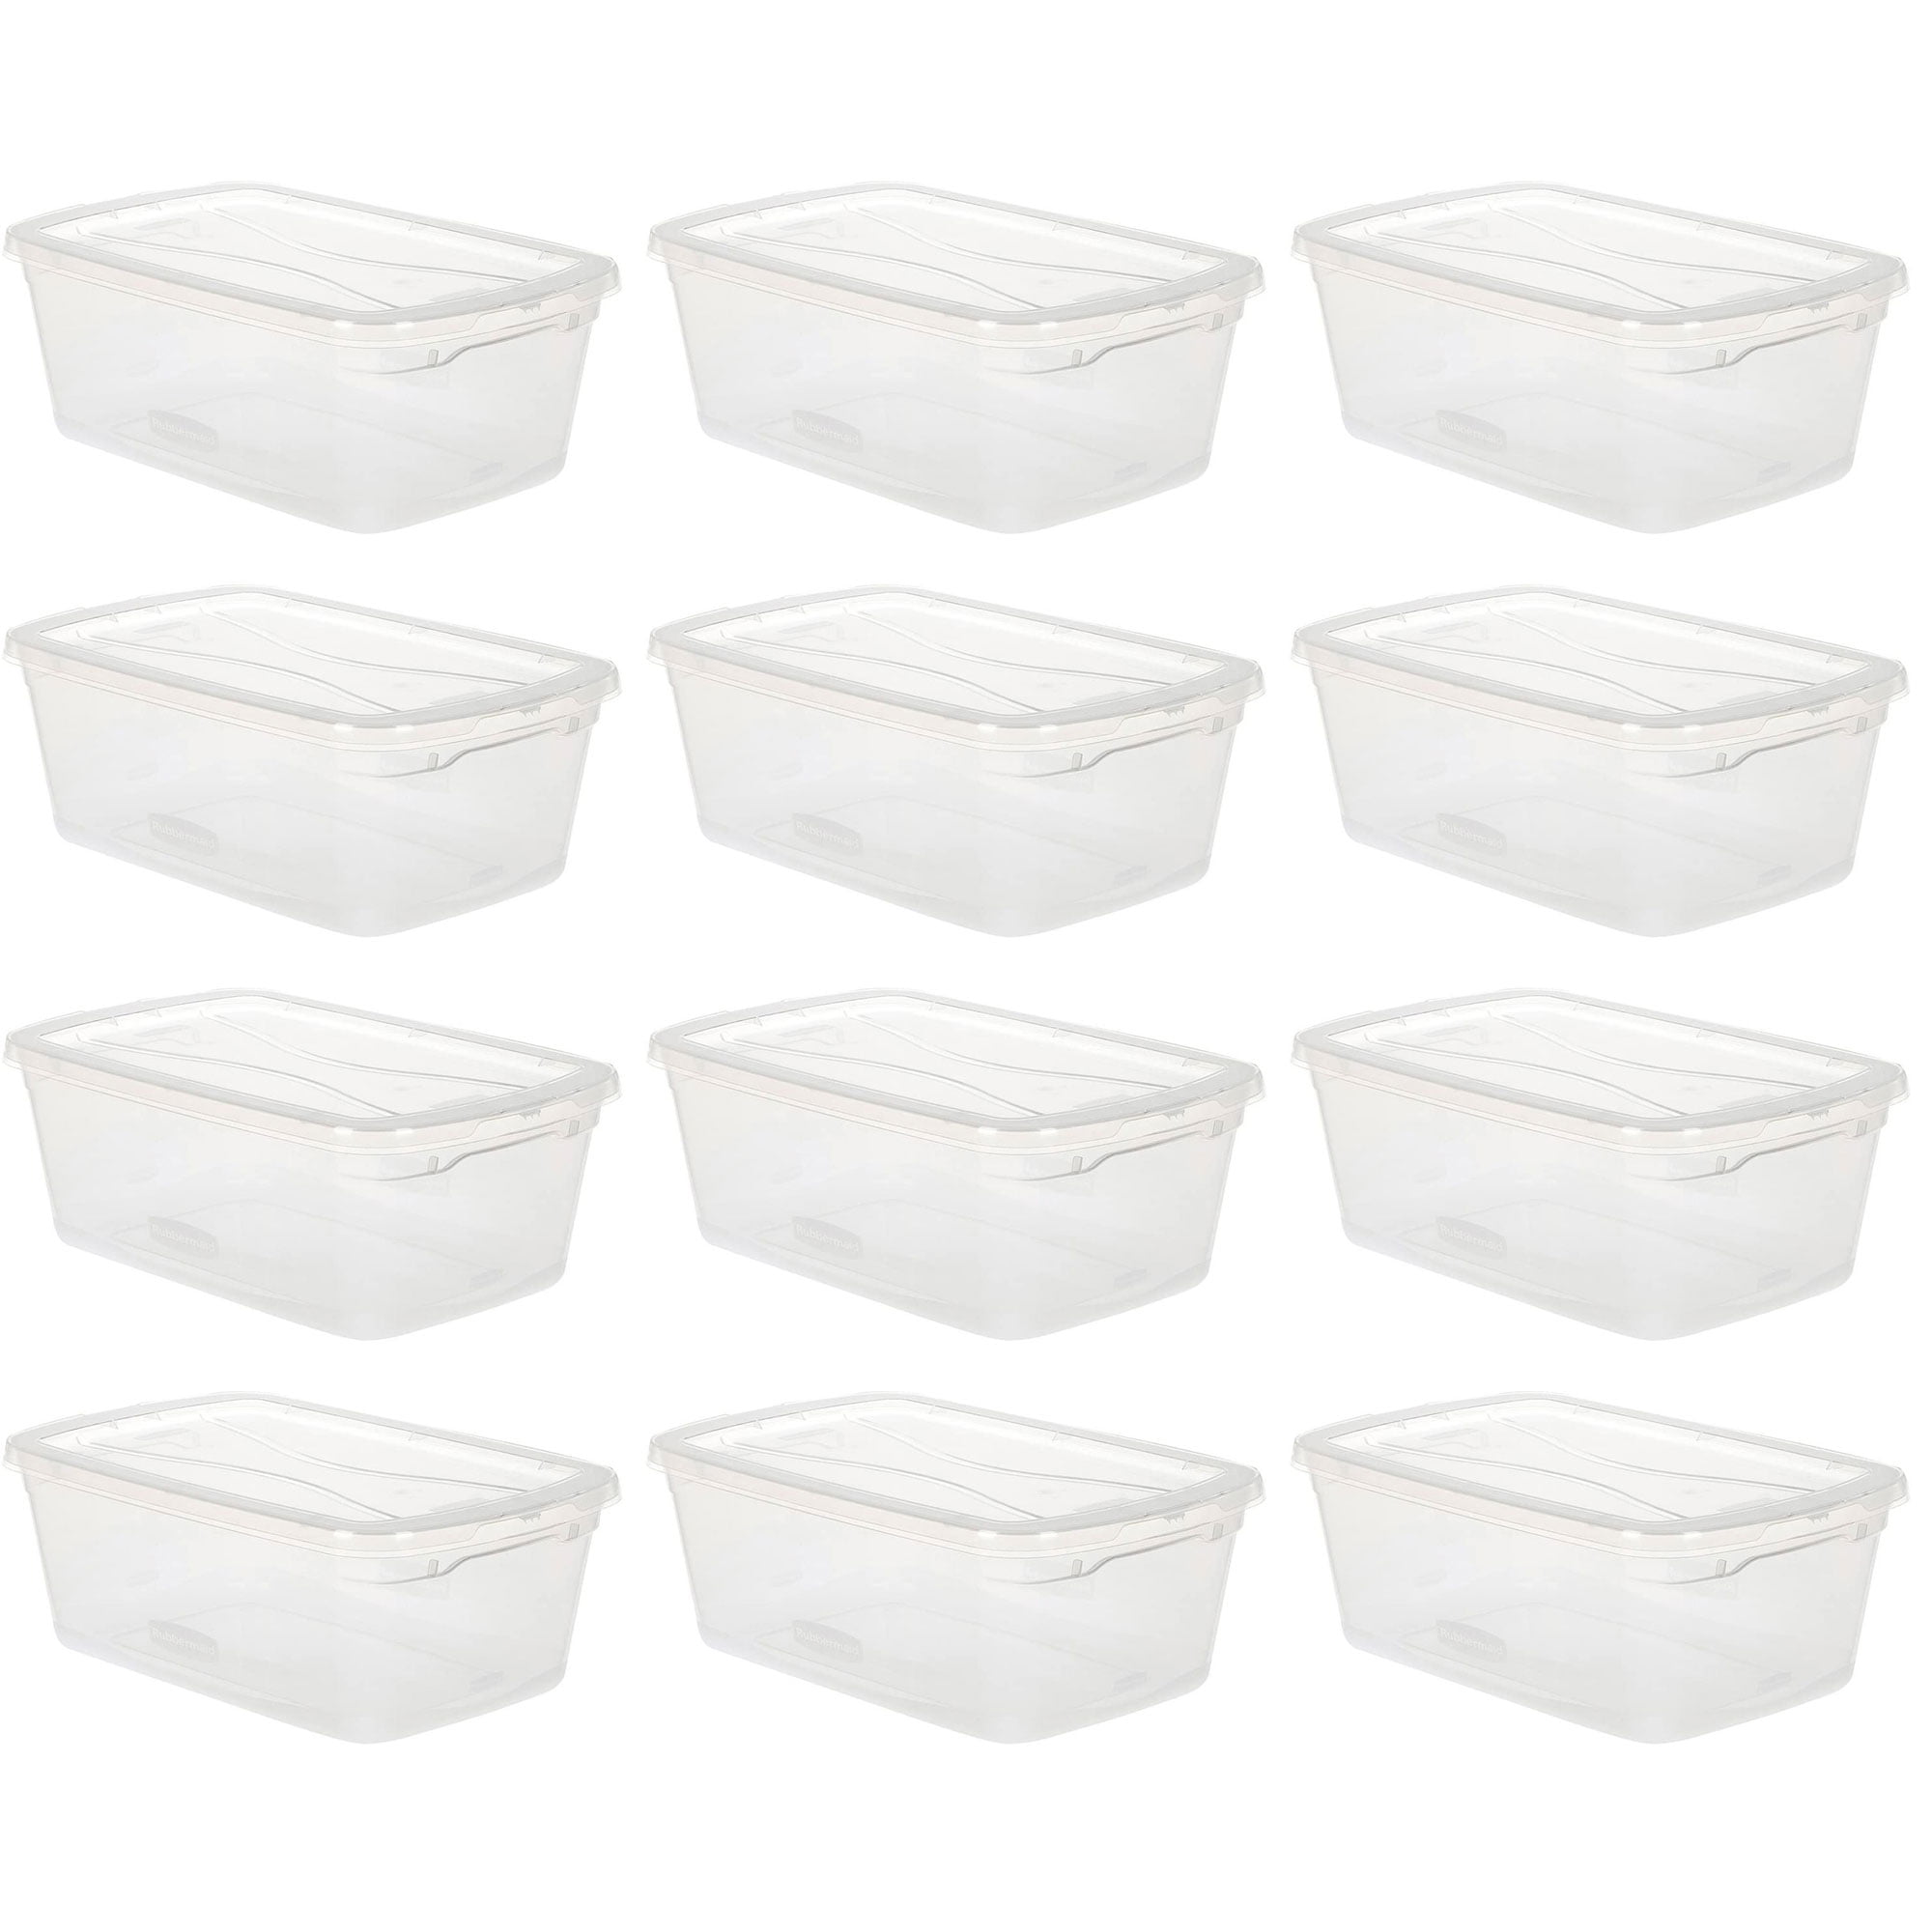 6 Pack 6 Quart Clear Storage Bins Plastic Storage Boxes Organizer Tub Containers 